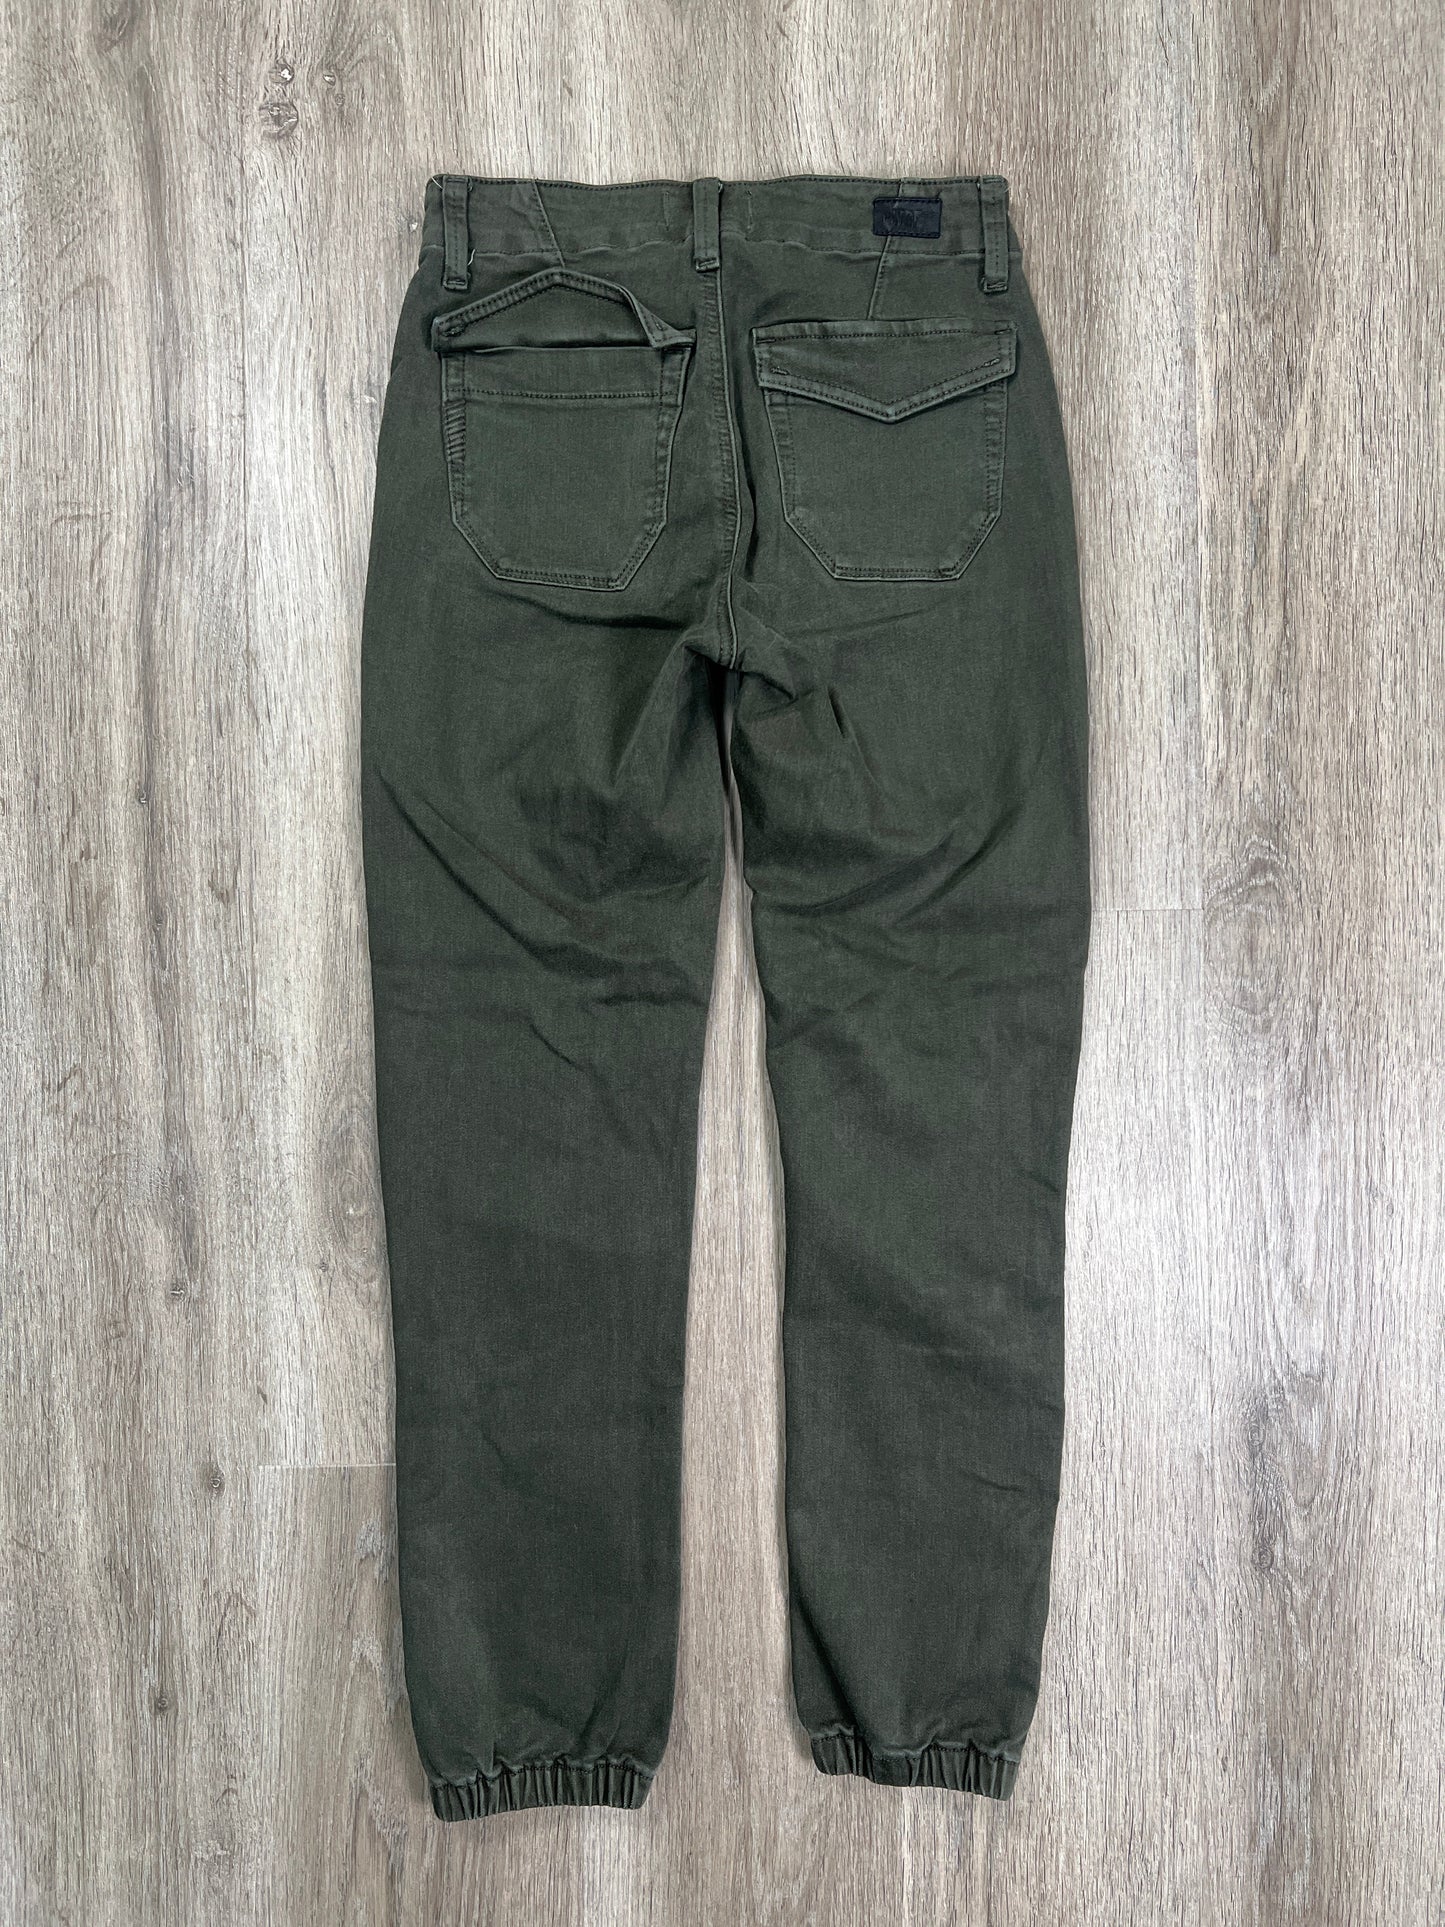 Pants Cargo & Utility By Paige  Size: S